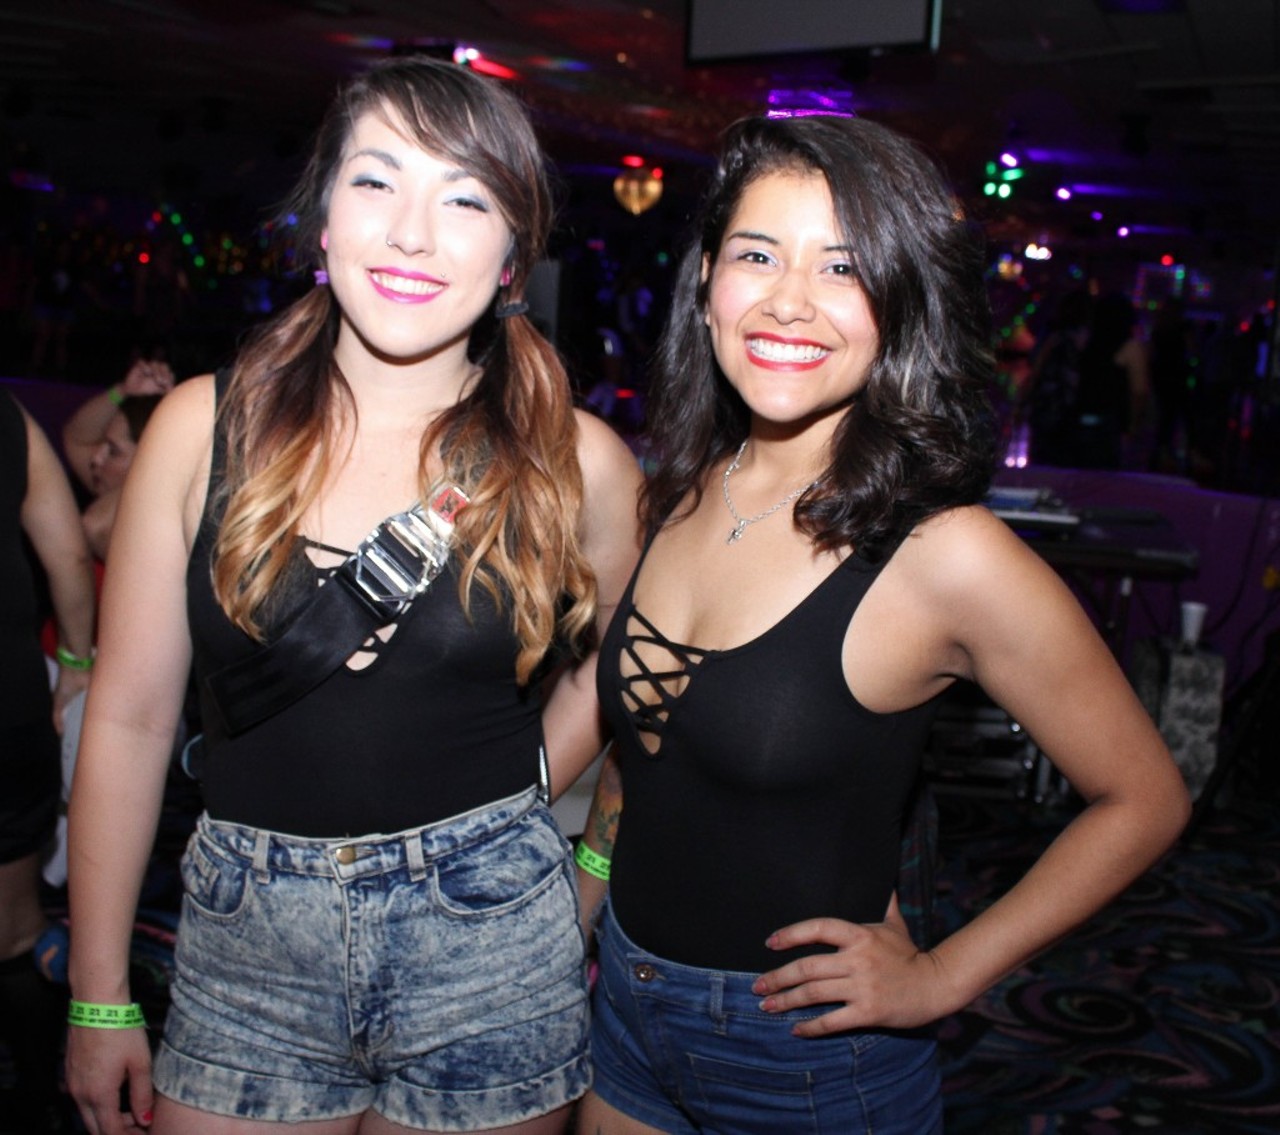 43 Photos of Boogie Night at The Rollercade